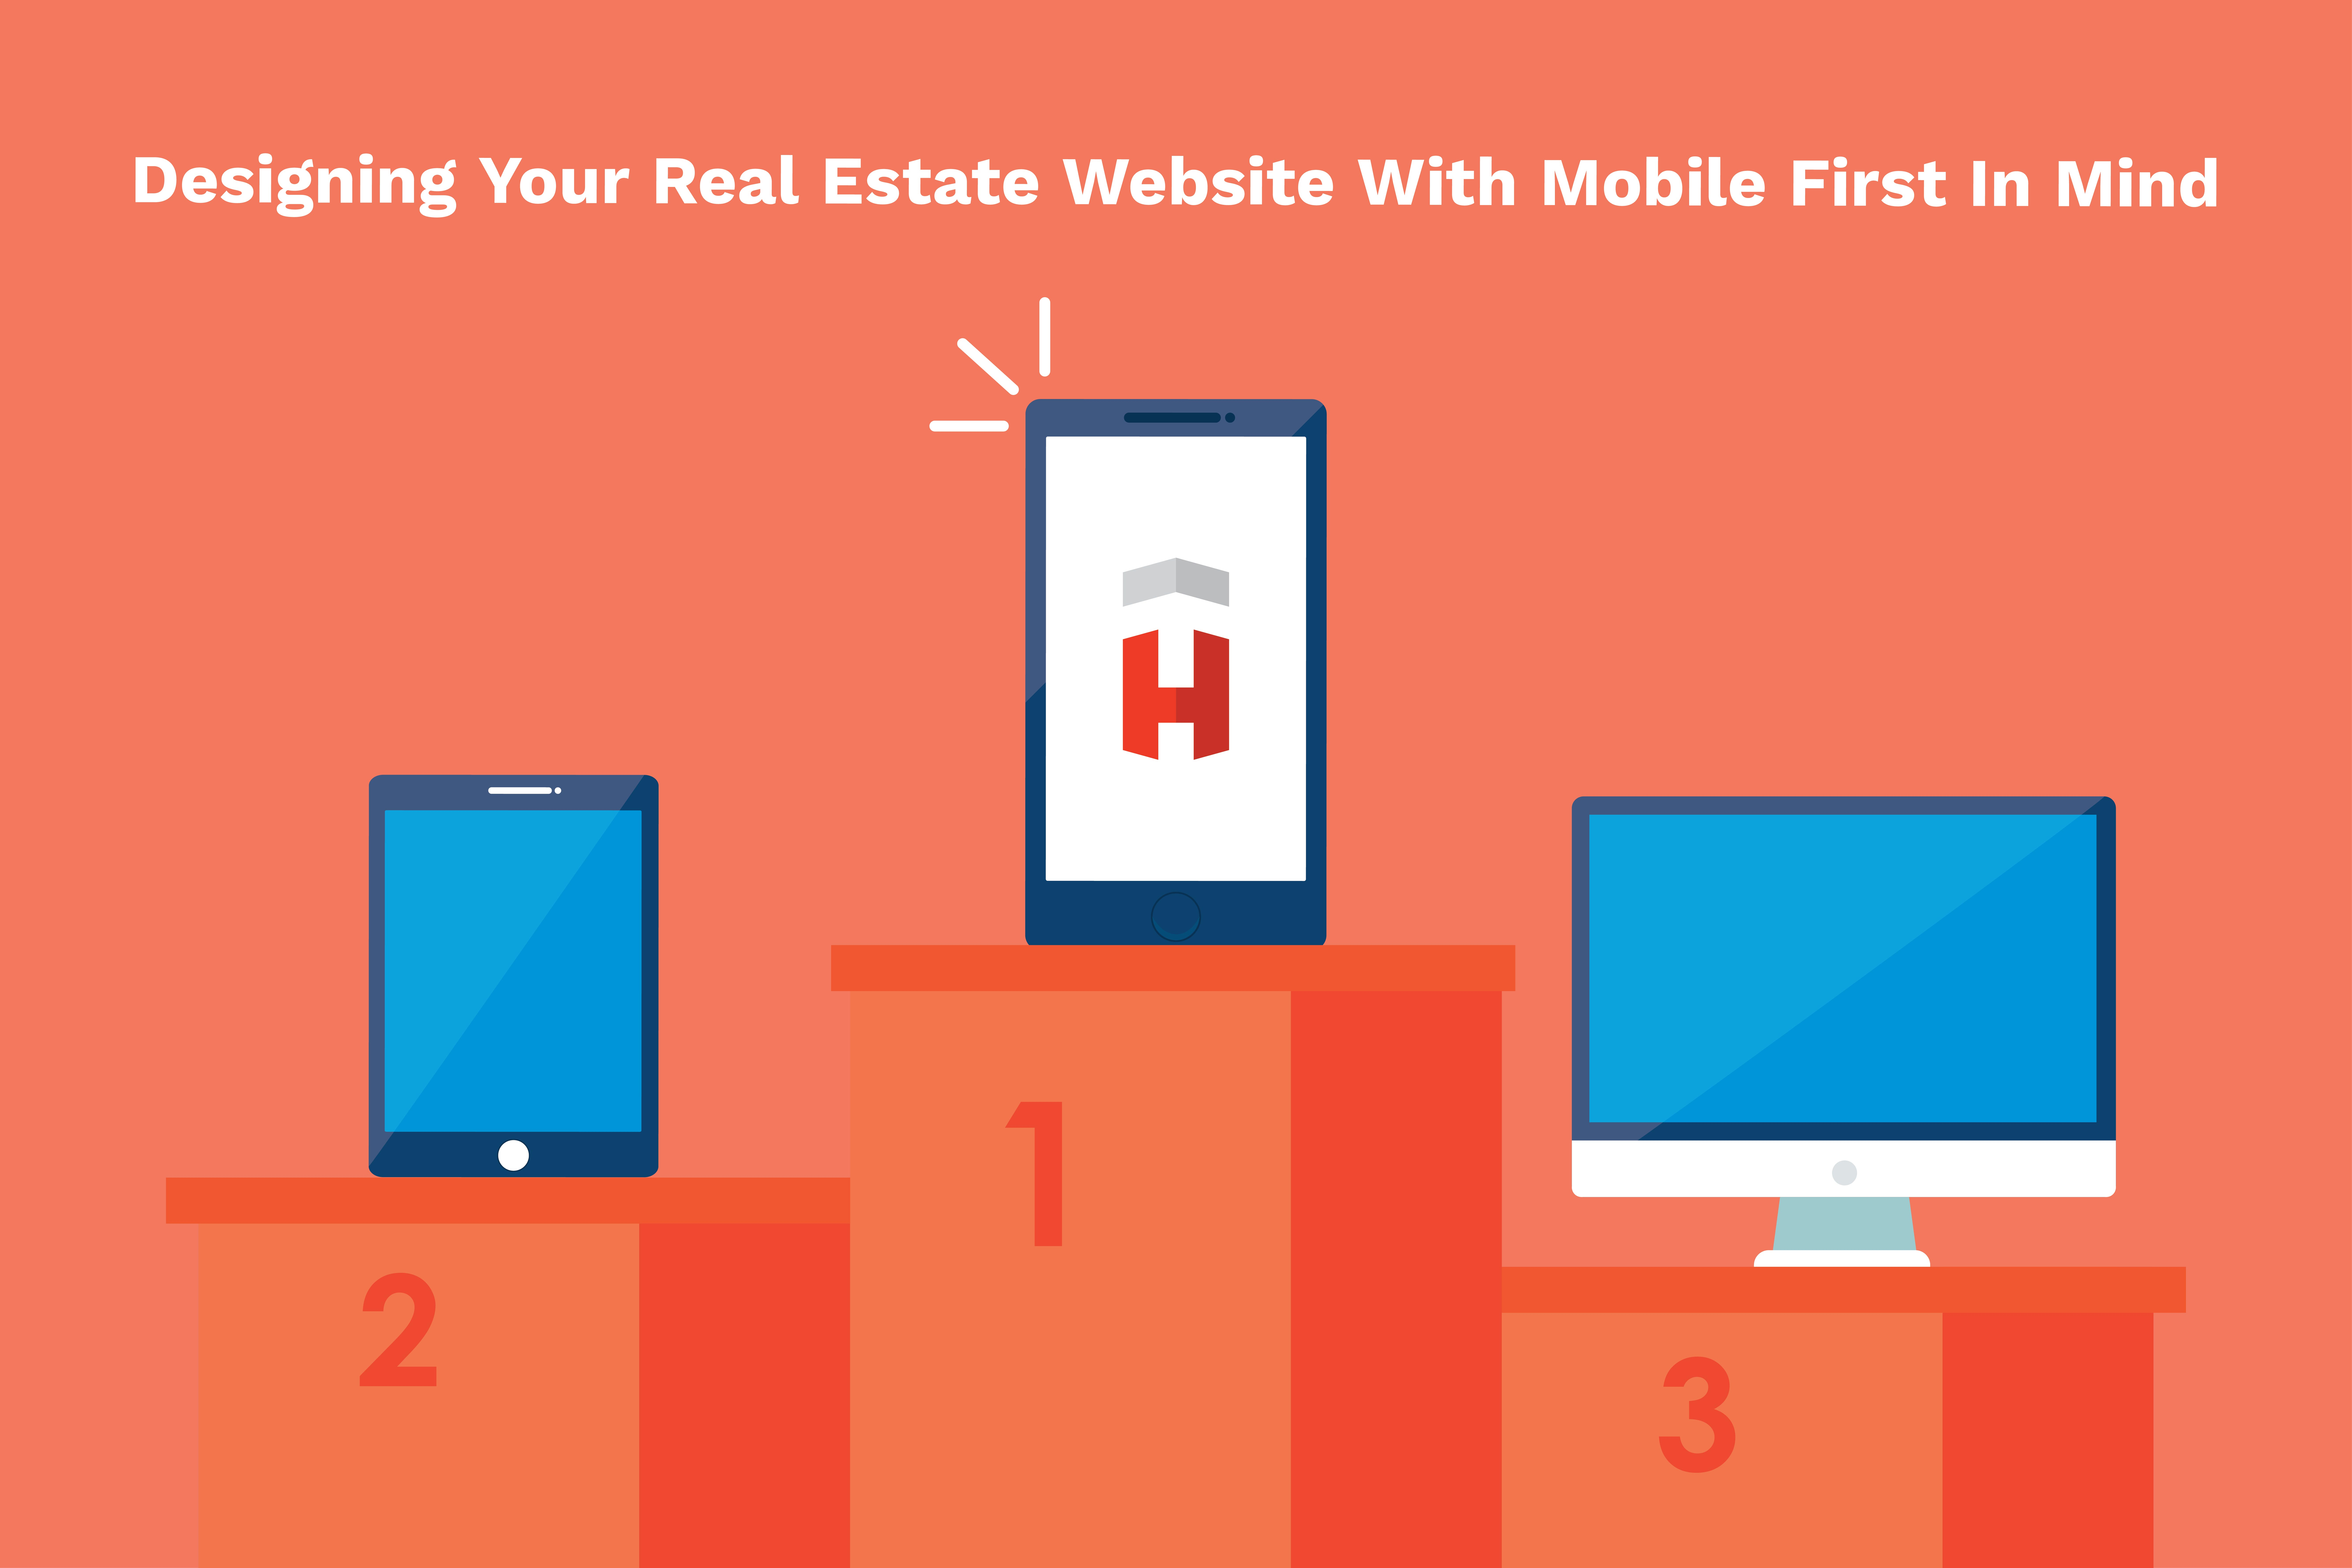 Drive More Leads With A Mobile-First Website Design